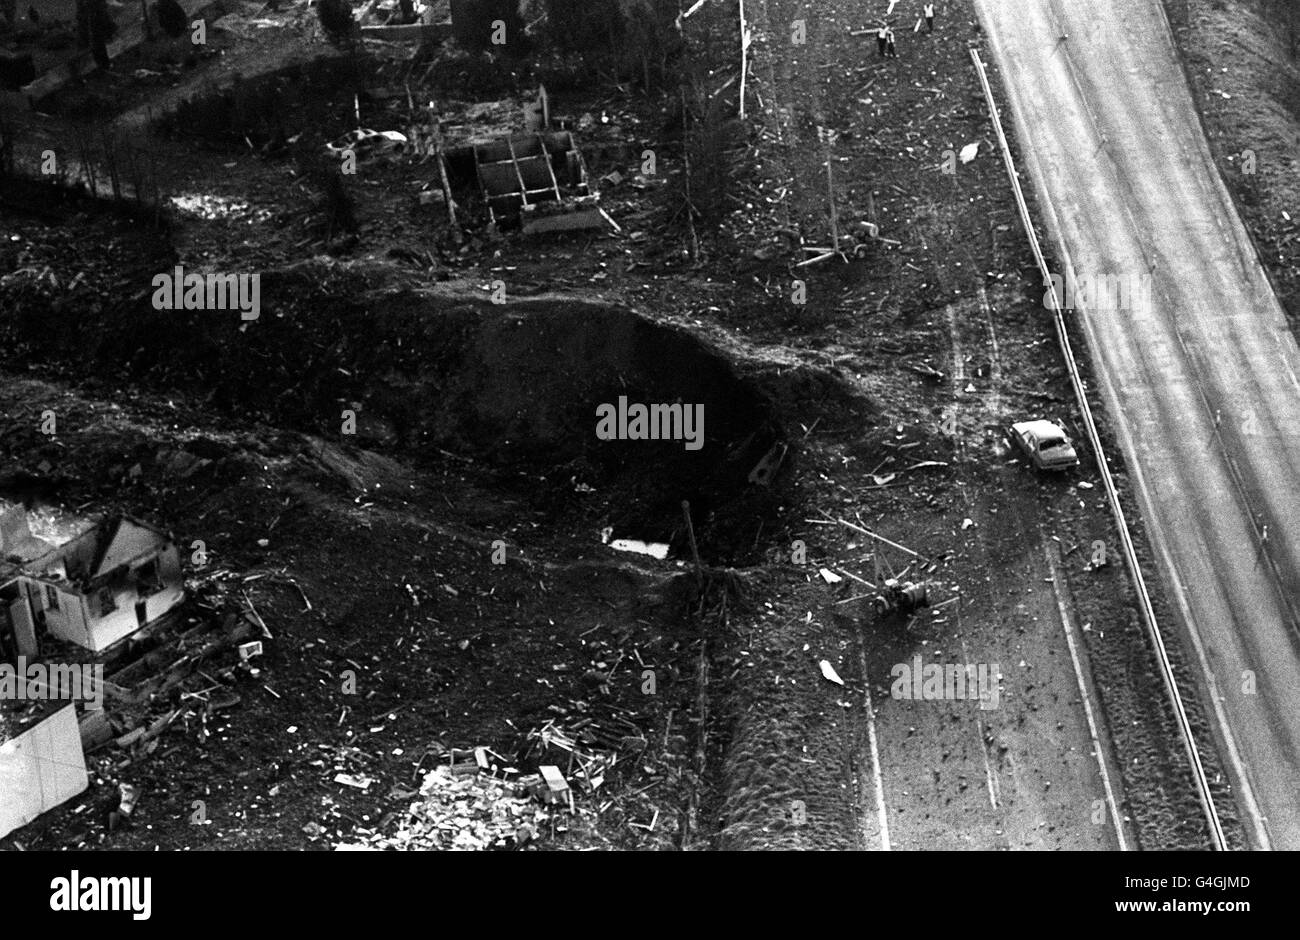 PA NEWS PHOTO 22/12/88 AN AERIAL VIEW SHOWING THE MASSIVE CRATER NEXT TO THE A74 MAIN ROAD AND HOUSES DEVASTATED BY THE PAN AM BOEING 747 JUMBO JET WHICH CRASHED INTO THE SCOTTISH TOWN OF LOCKERBIE, NEAR DUMFRIES, SCOTLAND * 30/01/2001: Three judges will be returning to court 31/01/2001 in Camp Zeist in Holland to announce the fate of the two Libyans accused of planting the bomb that destroyed the plane. *140803* A 1.7 million deal to compensate the families of 270 victims killed in the bombing has been agreed by Libya at the end of an exhaustive round of talks with British and American Stock Photo